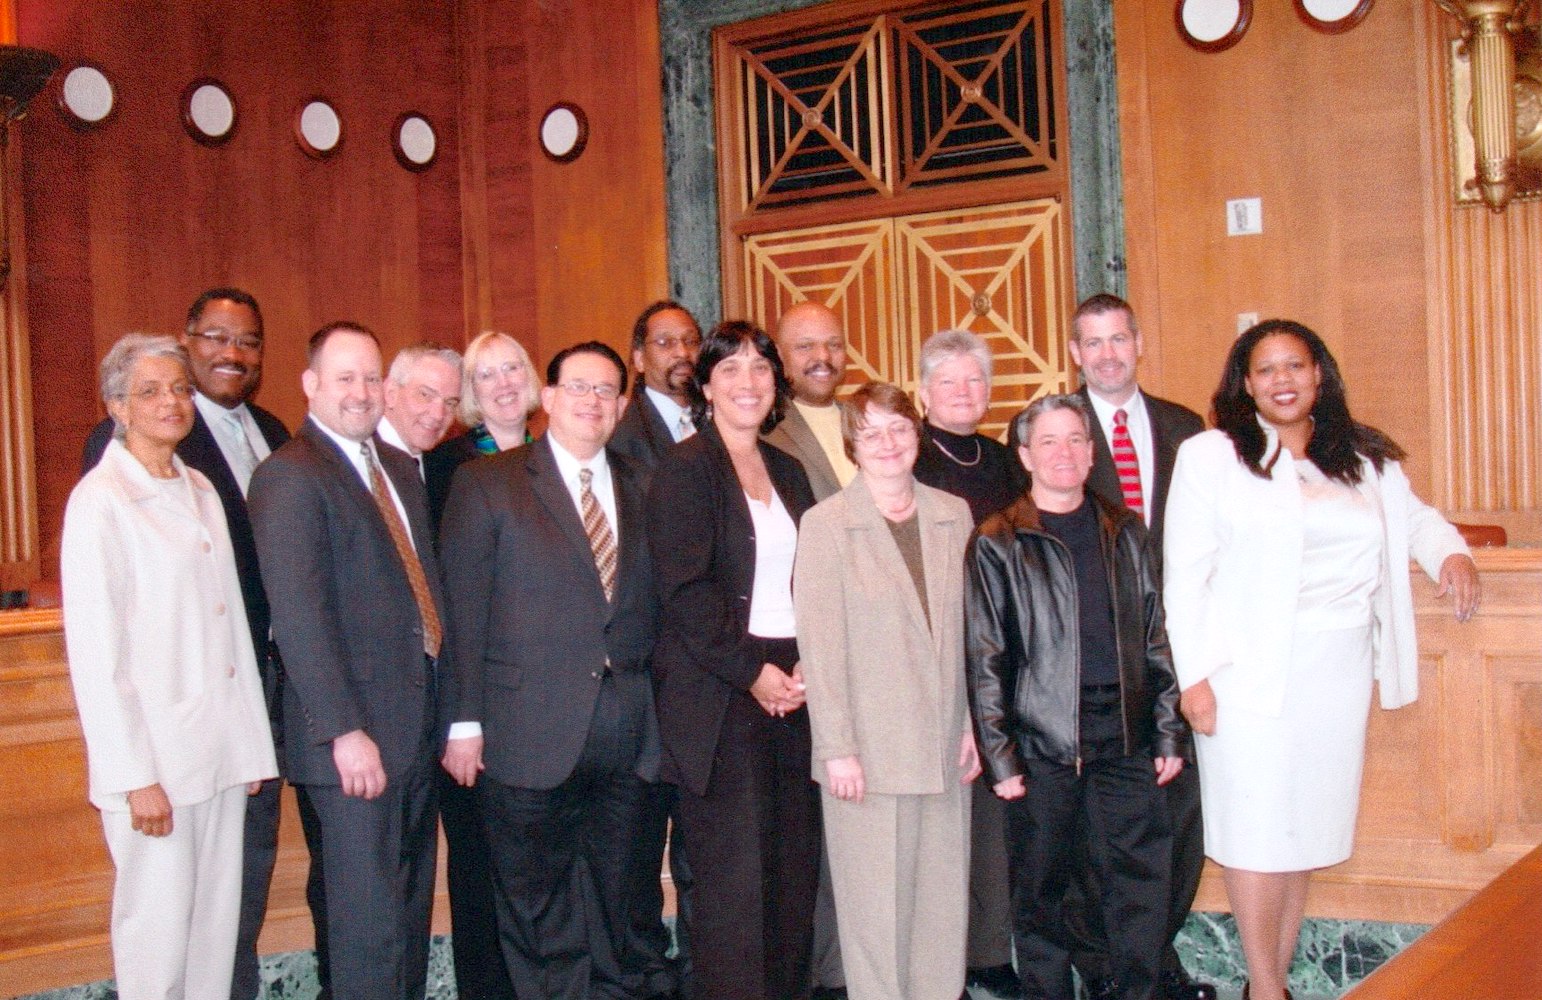 Kathie Hiers and the National AIDS Housing Coalition, 2005. Photo courtesy of Kathie Hiers.